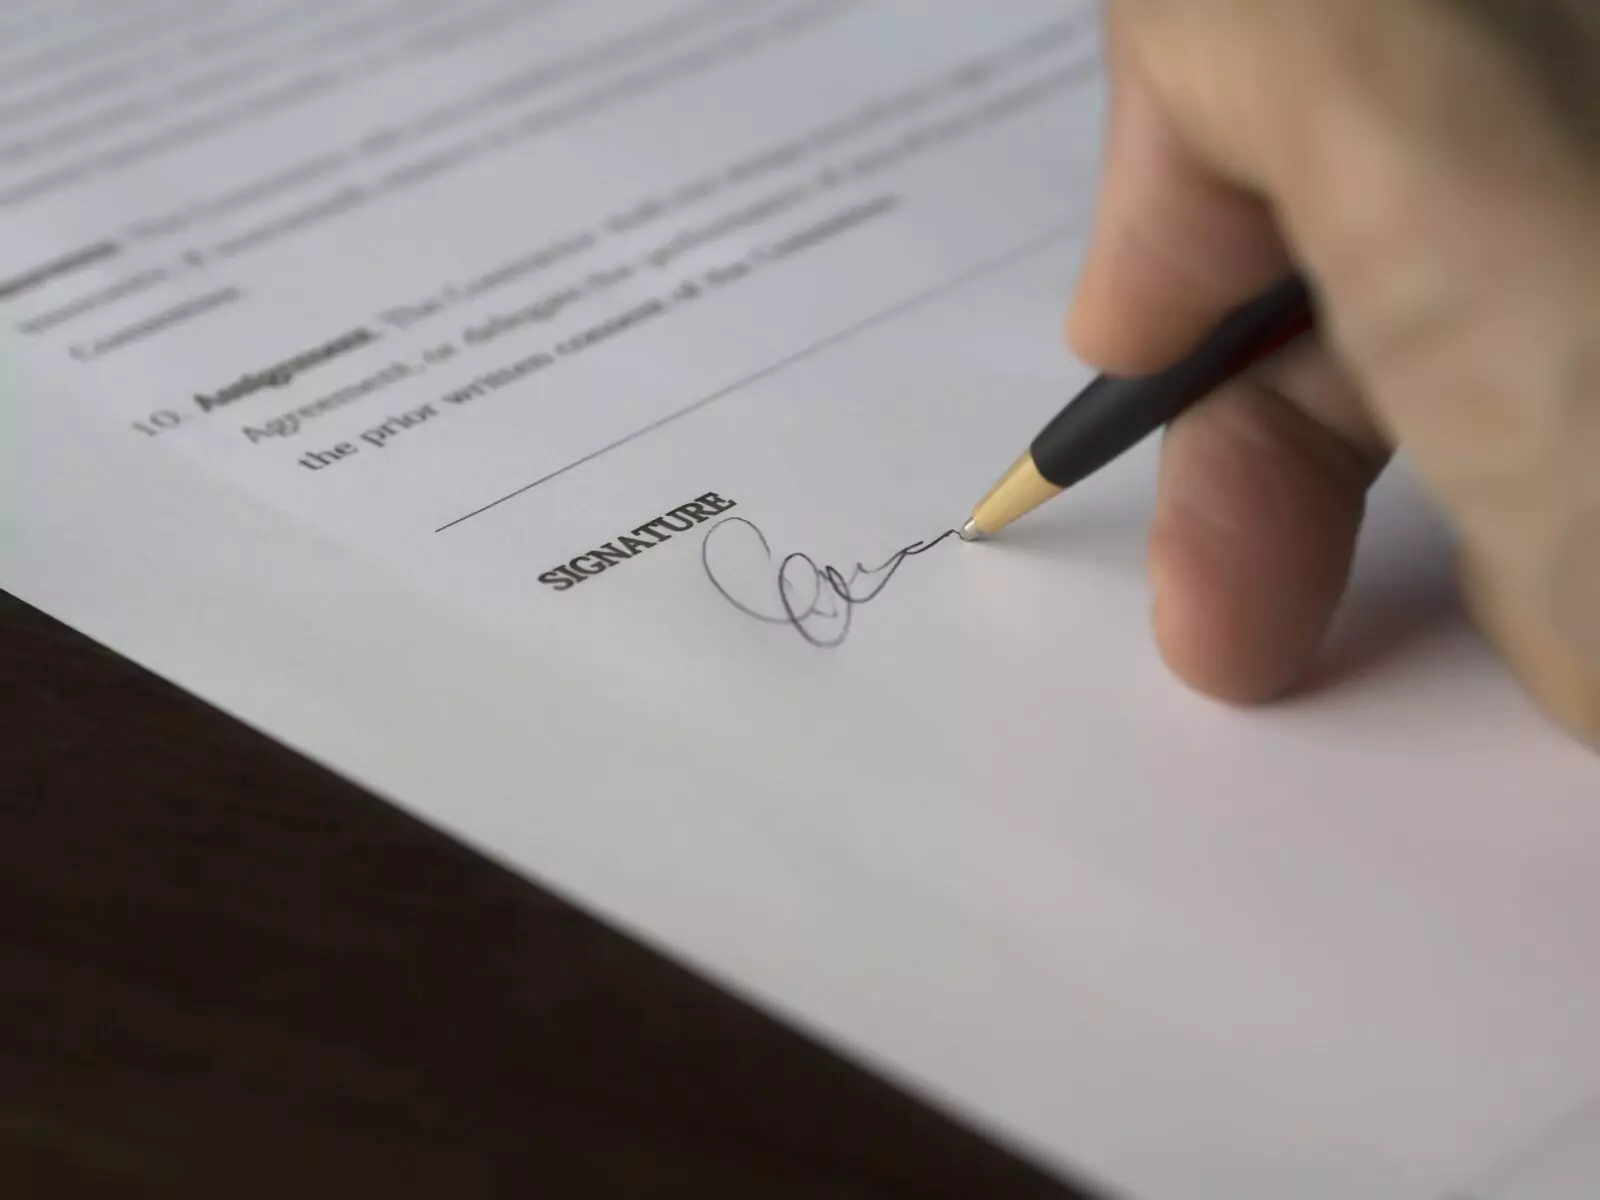 Hand signing a signature on a contract in pen ink.